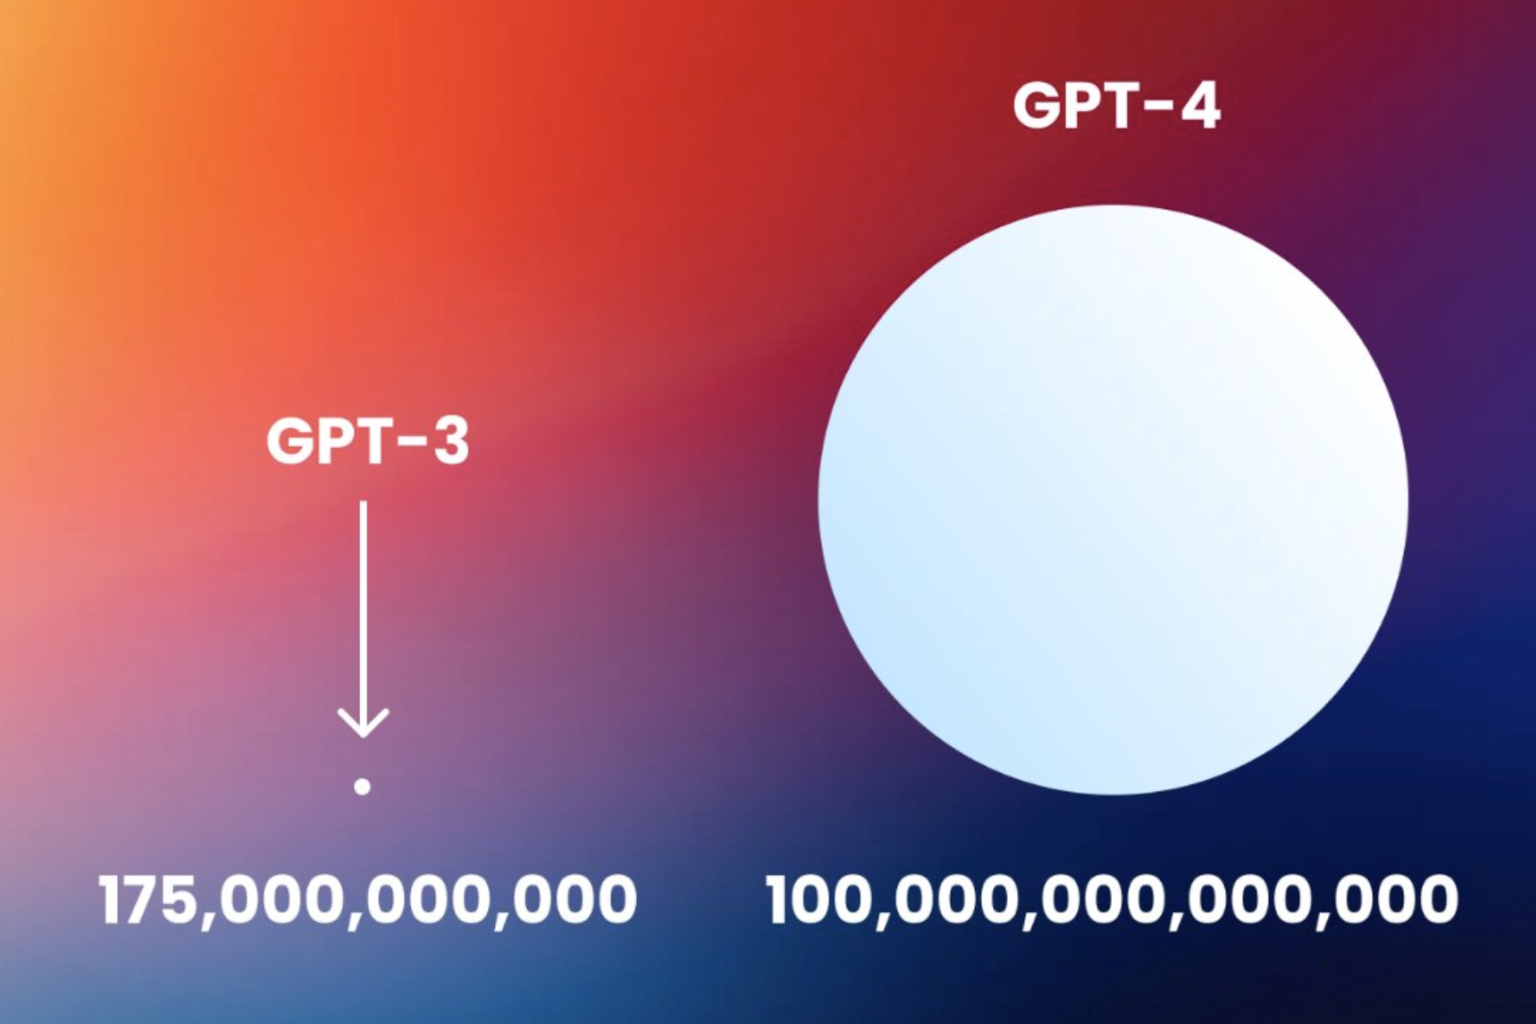 Explore how GPT-3 and GPT-4 have transformed data analysis and impacted industries. Discover their features, improvements, and limitations.